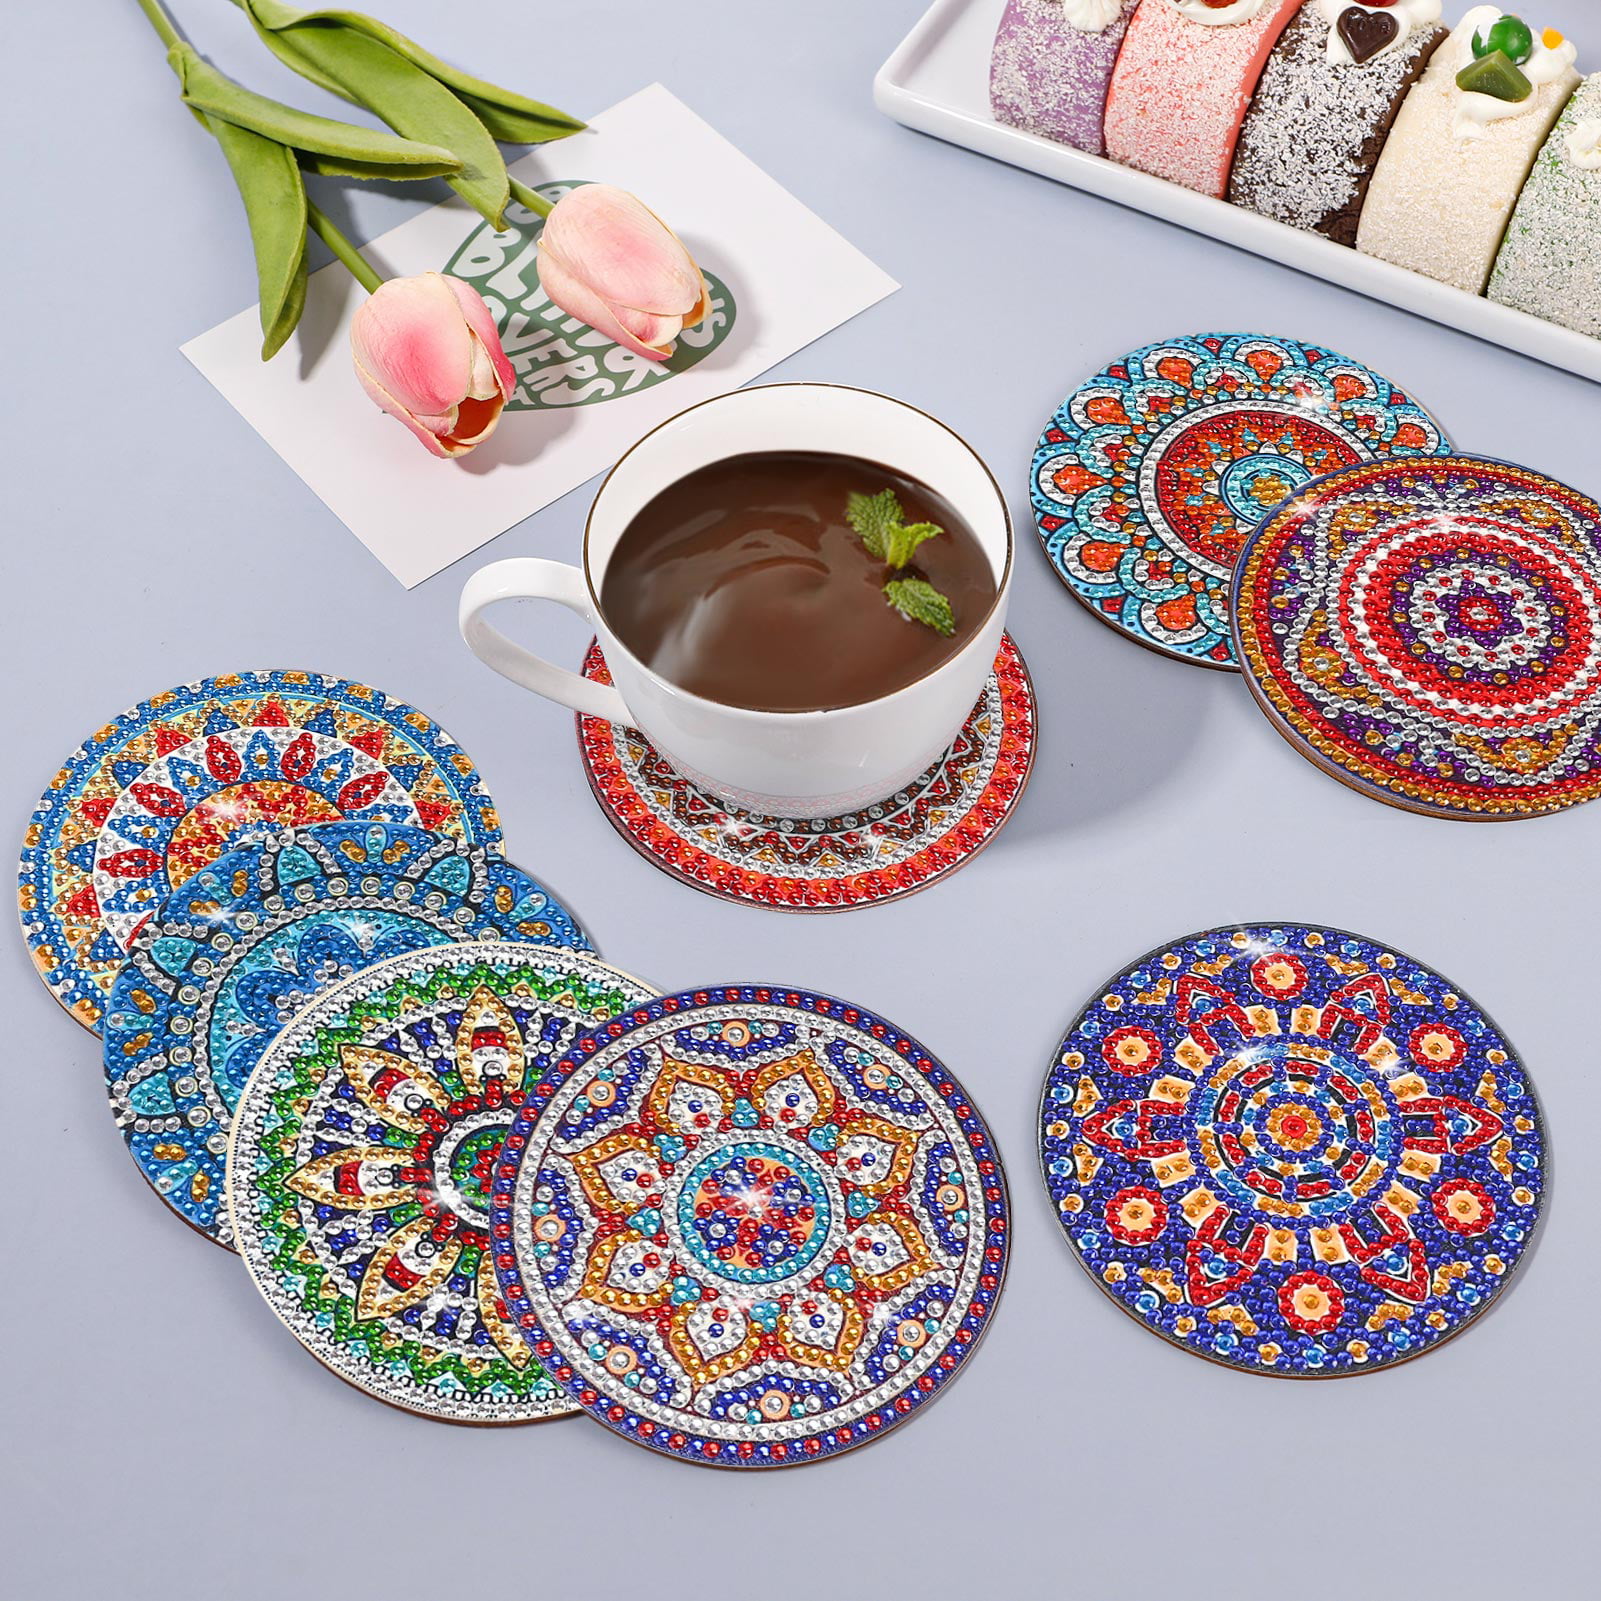 BSRESIN 8 Pcs Square Diamond Painting Coasters with Holder, Mandala Art,  DIY Crafts for Adults, Small Diamond Painting Kits Accessories